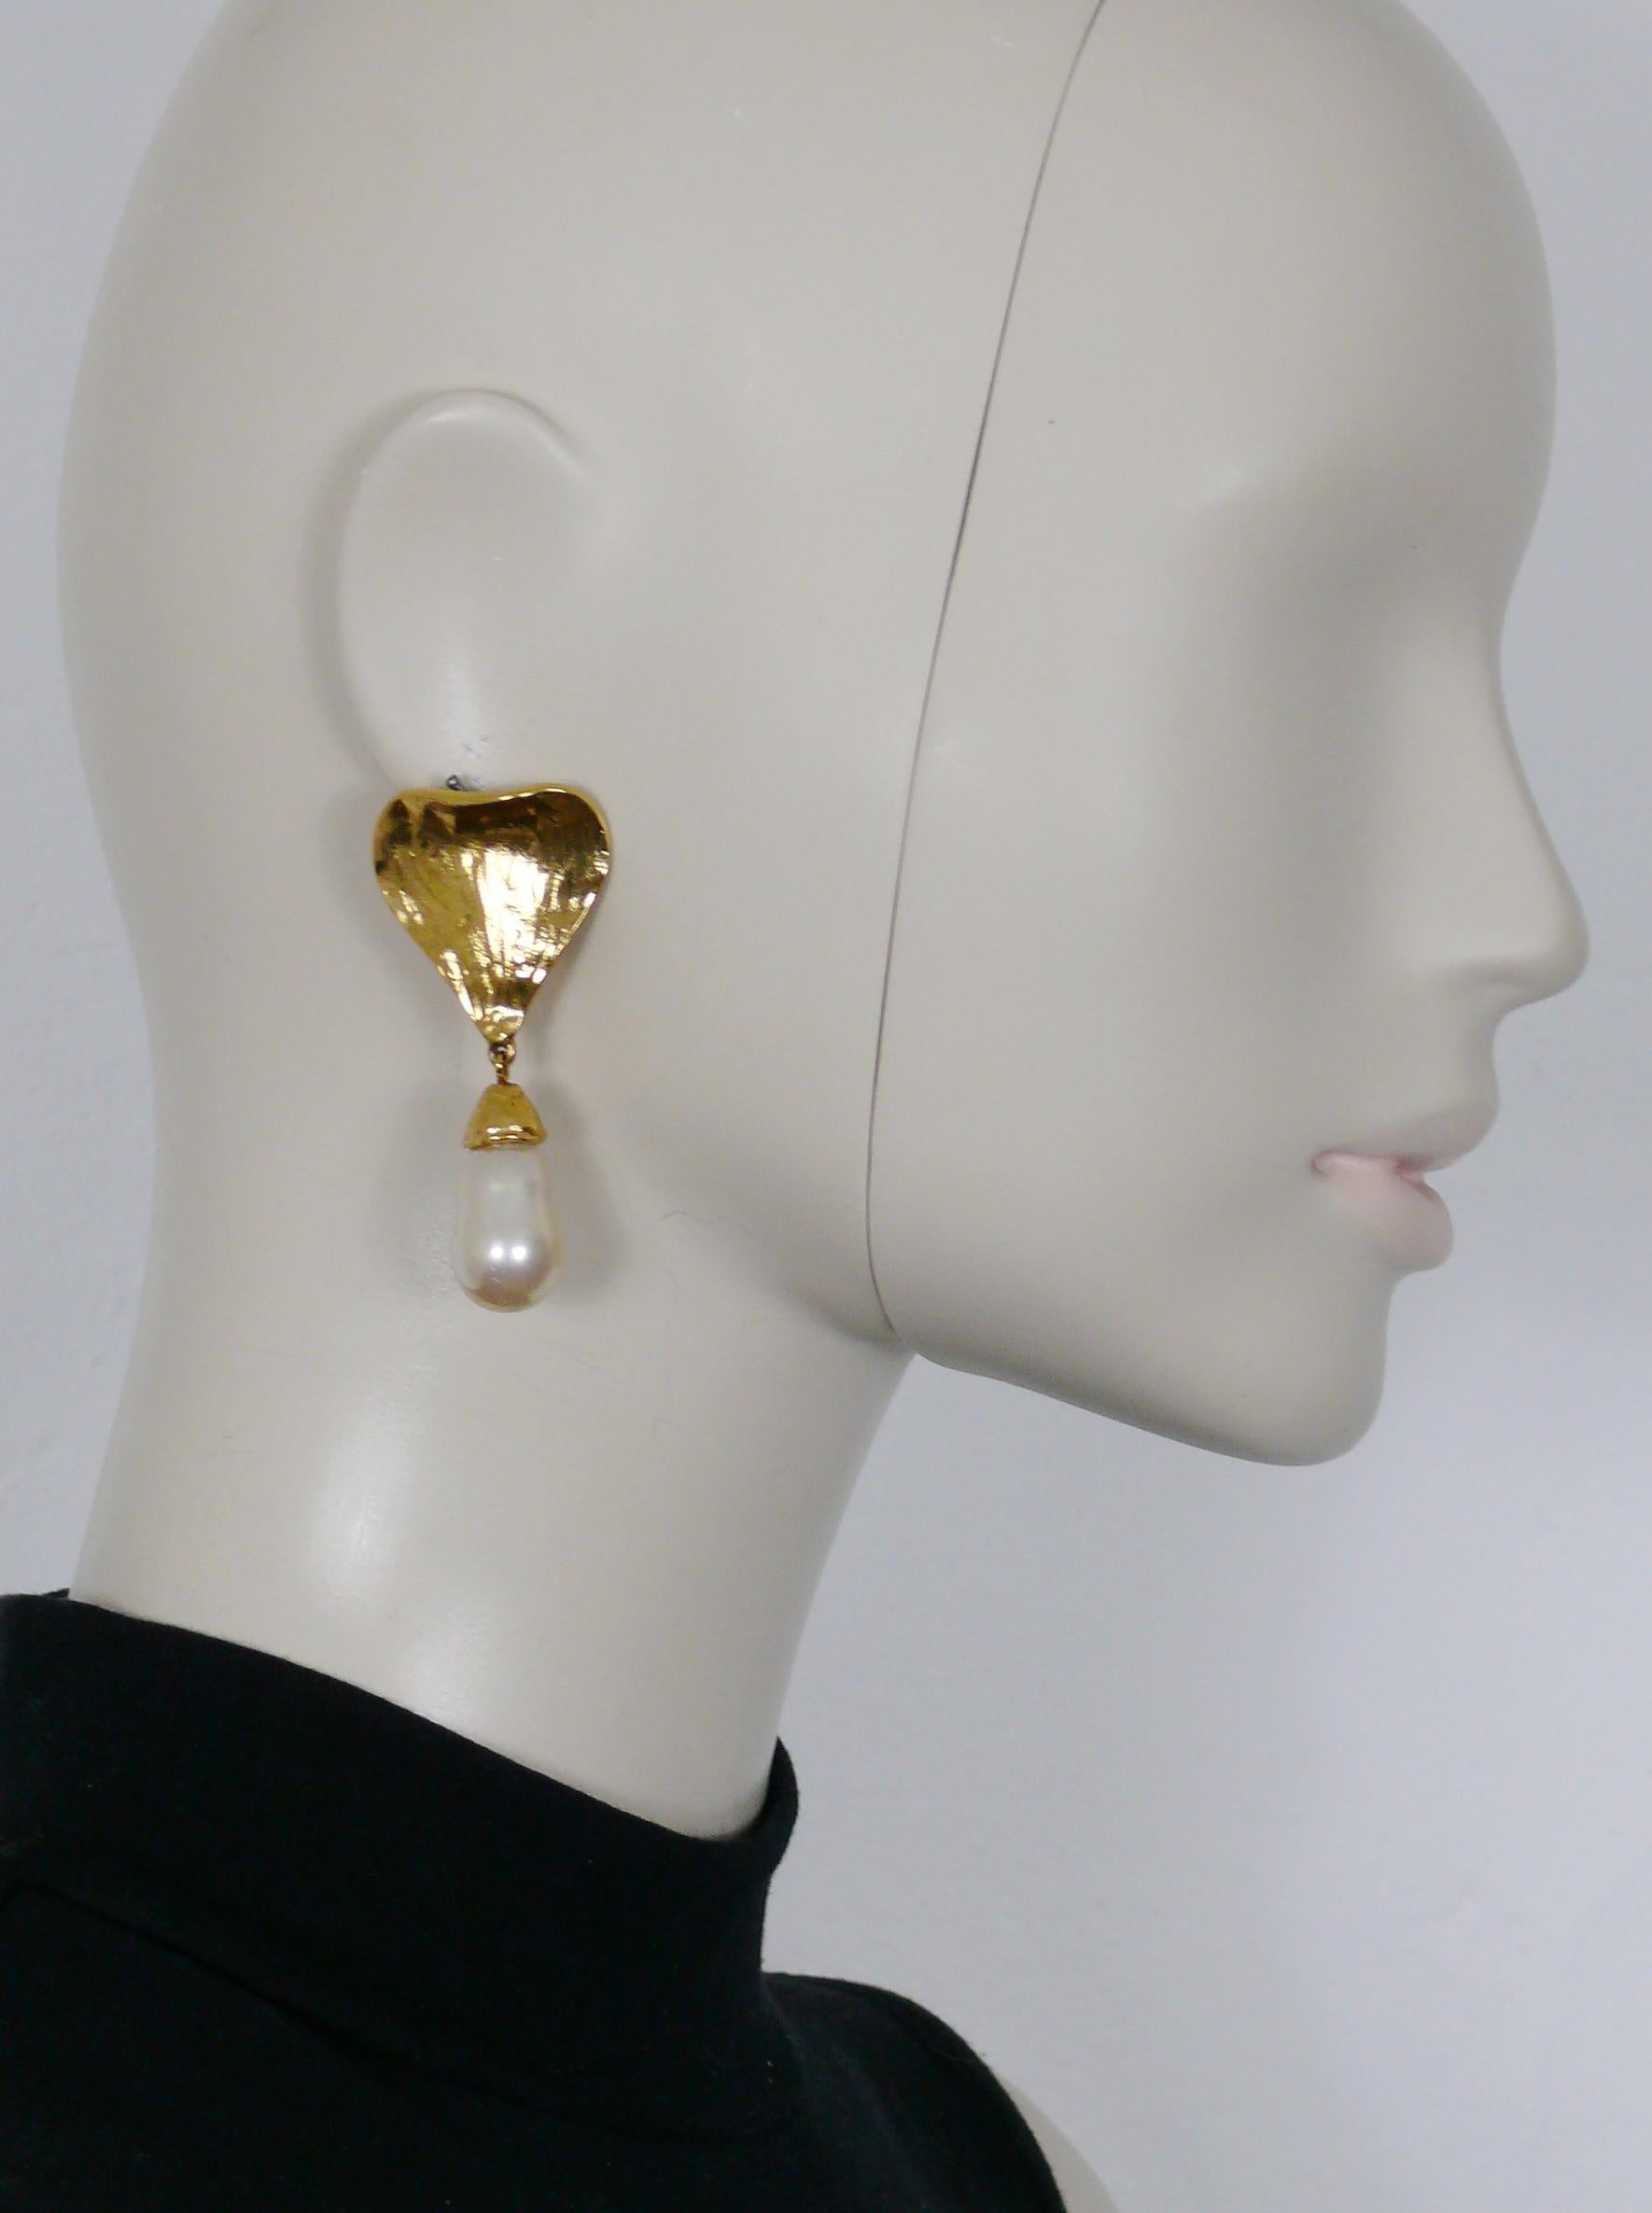 YVES SAINT LAURENT vintage textured gold toned heart dangling earrings (clip on) embellished with a faux pearl drop.

Embossed YSL Made in France.

Indicative measurements : max. height approx. 6 cm (2.36 inches) / max. width approx. 2.8 cm (1.10